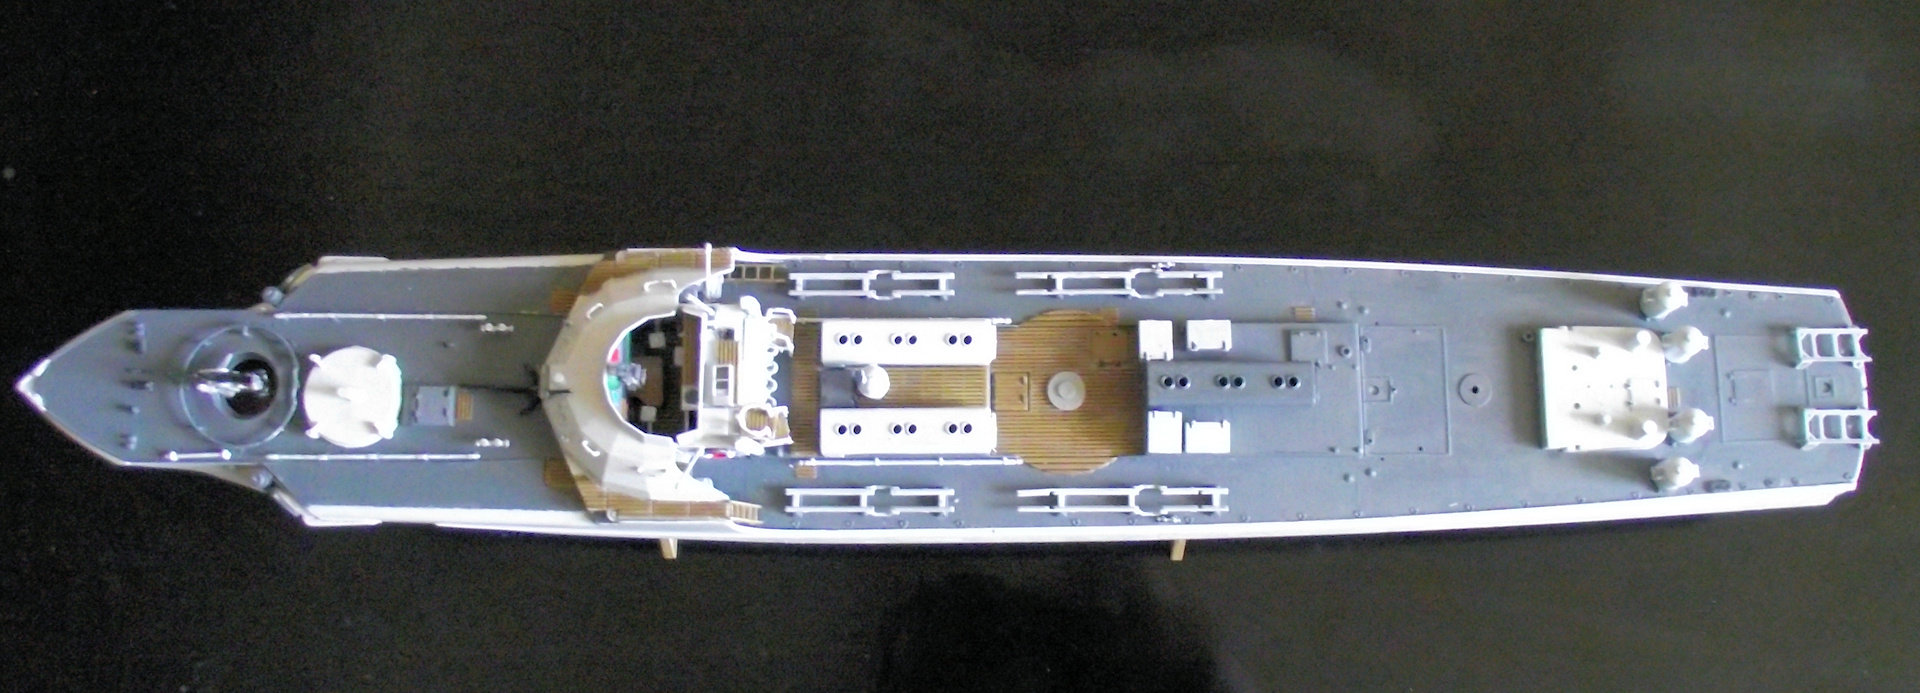 Schnellboat S100 Revell au 1x72 Bhae